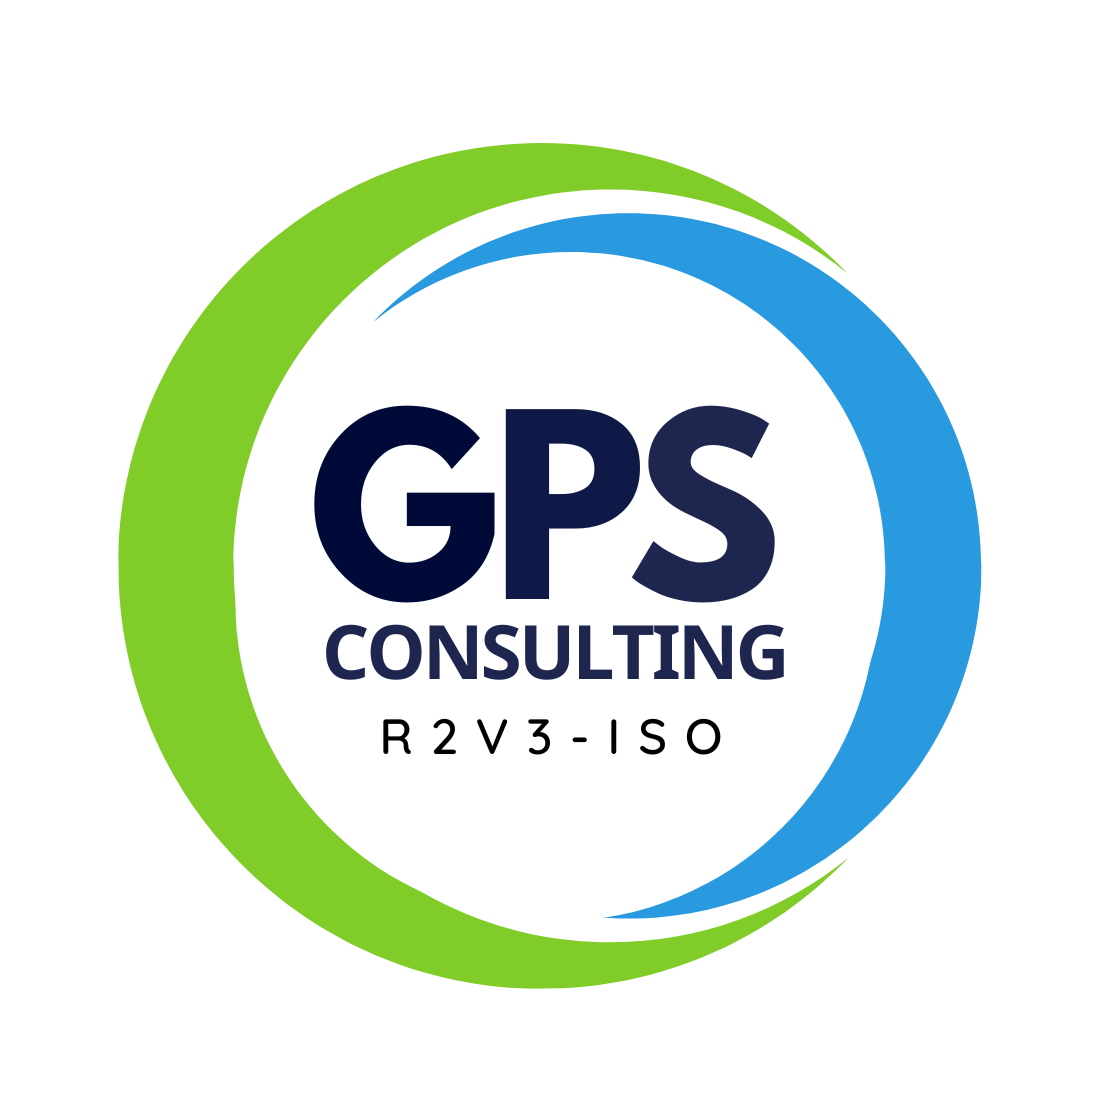 GPS CONSULTING